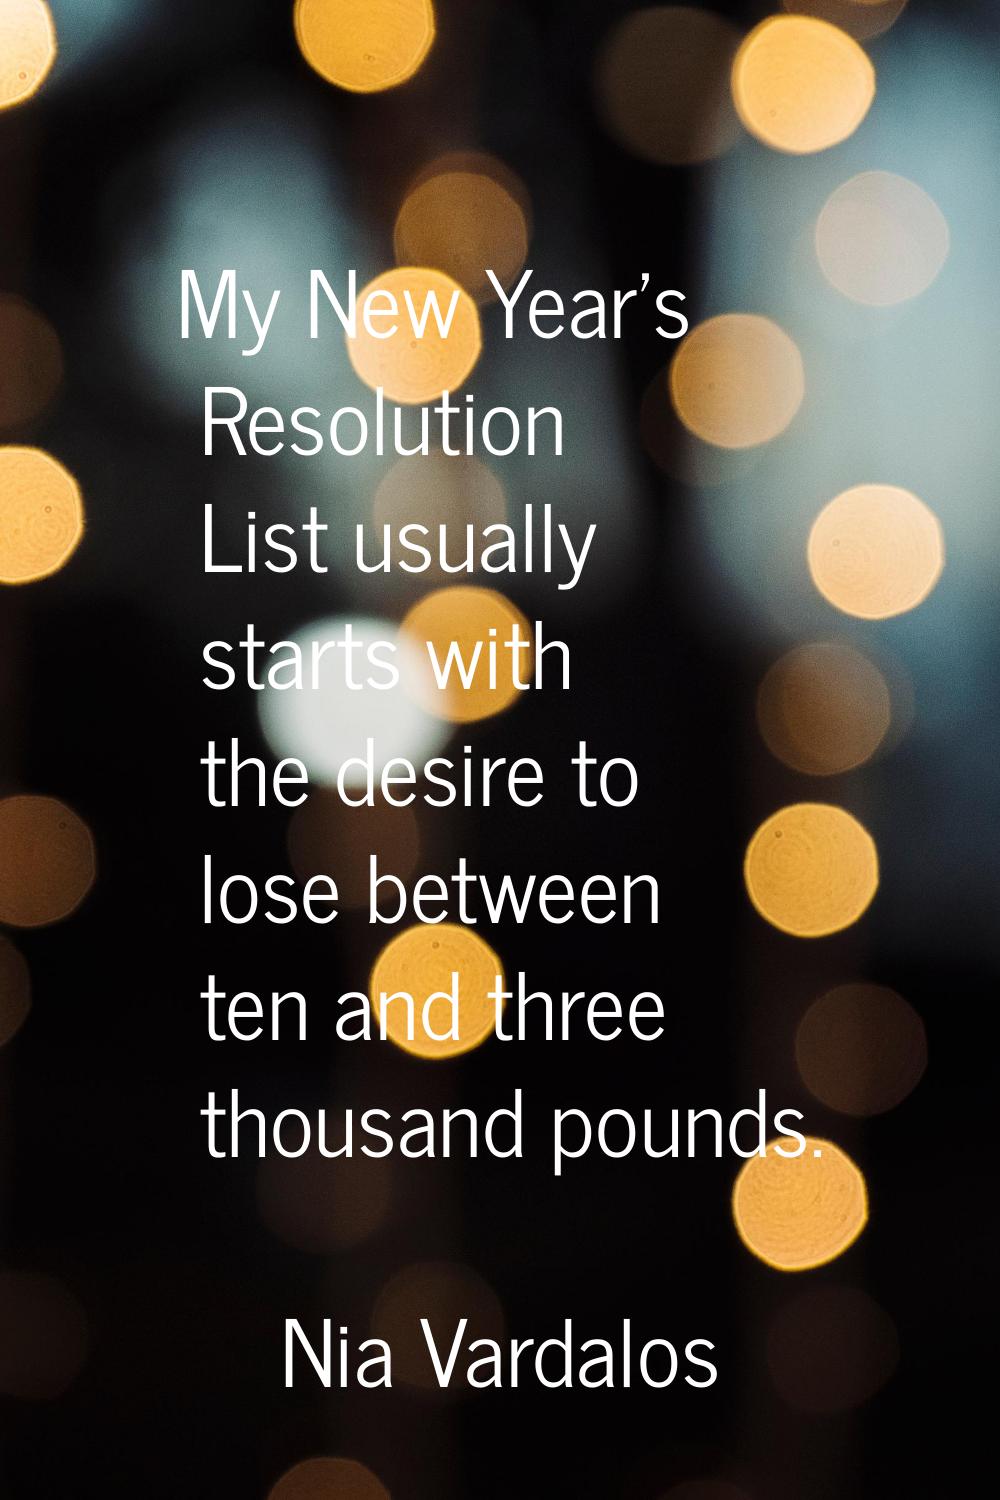 My New Year's Resolution List usually starts with the desire to lose between ten and three thousand